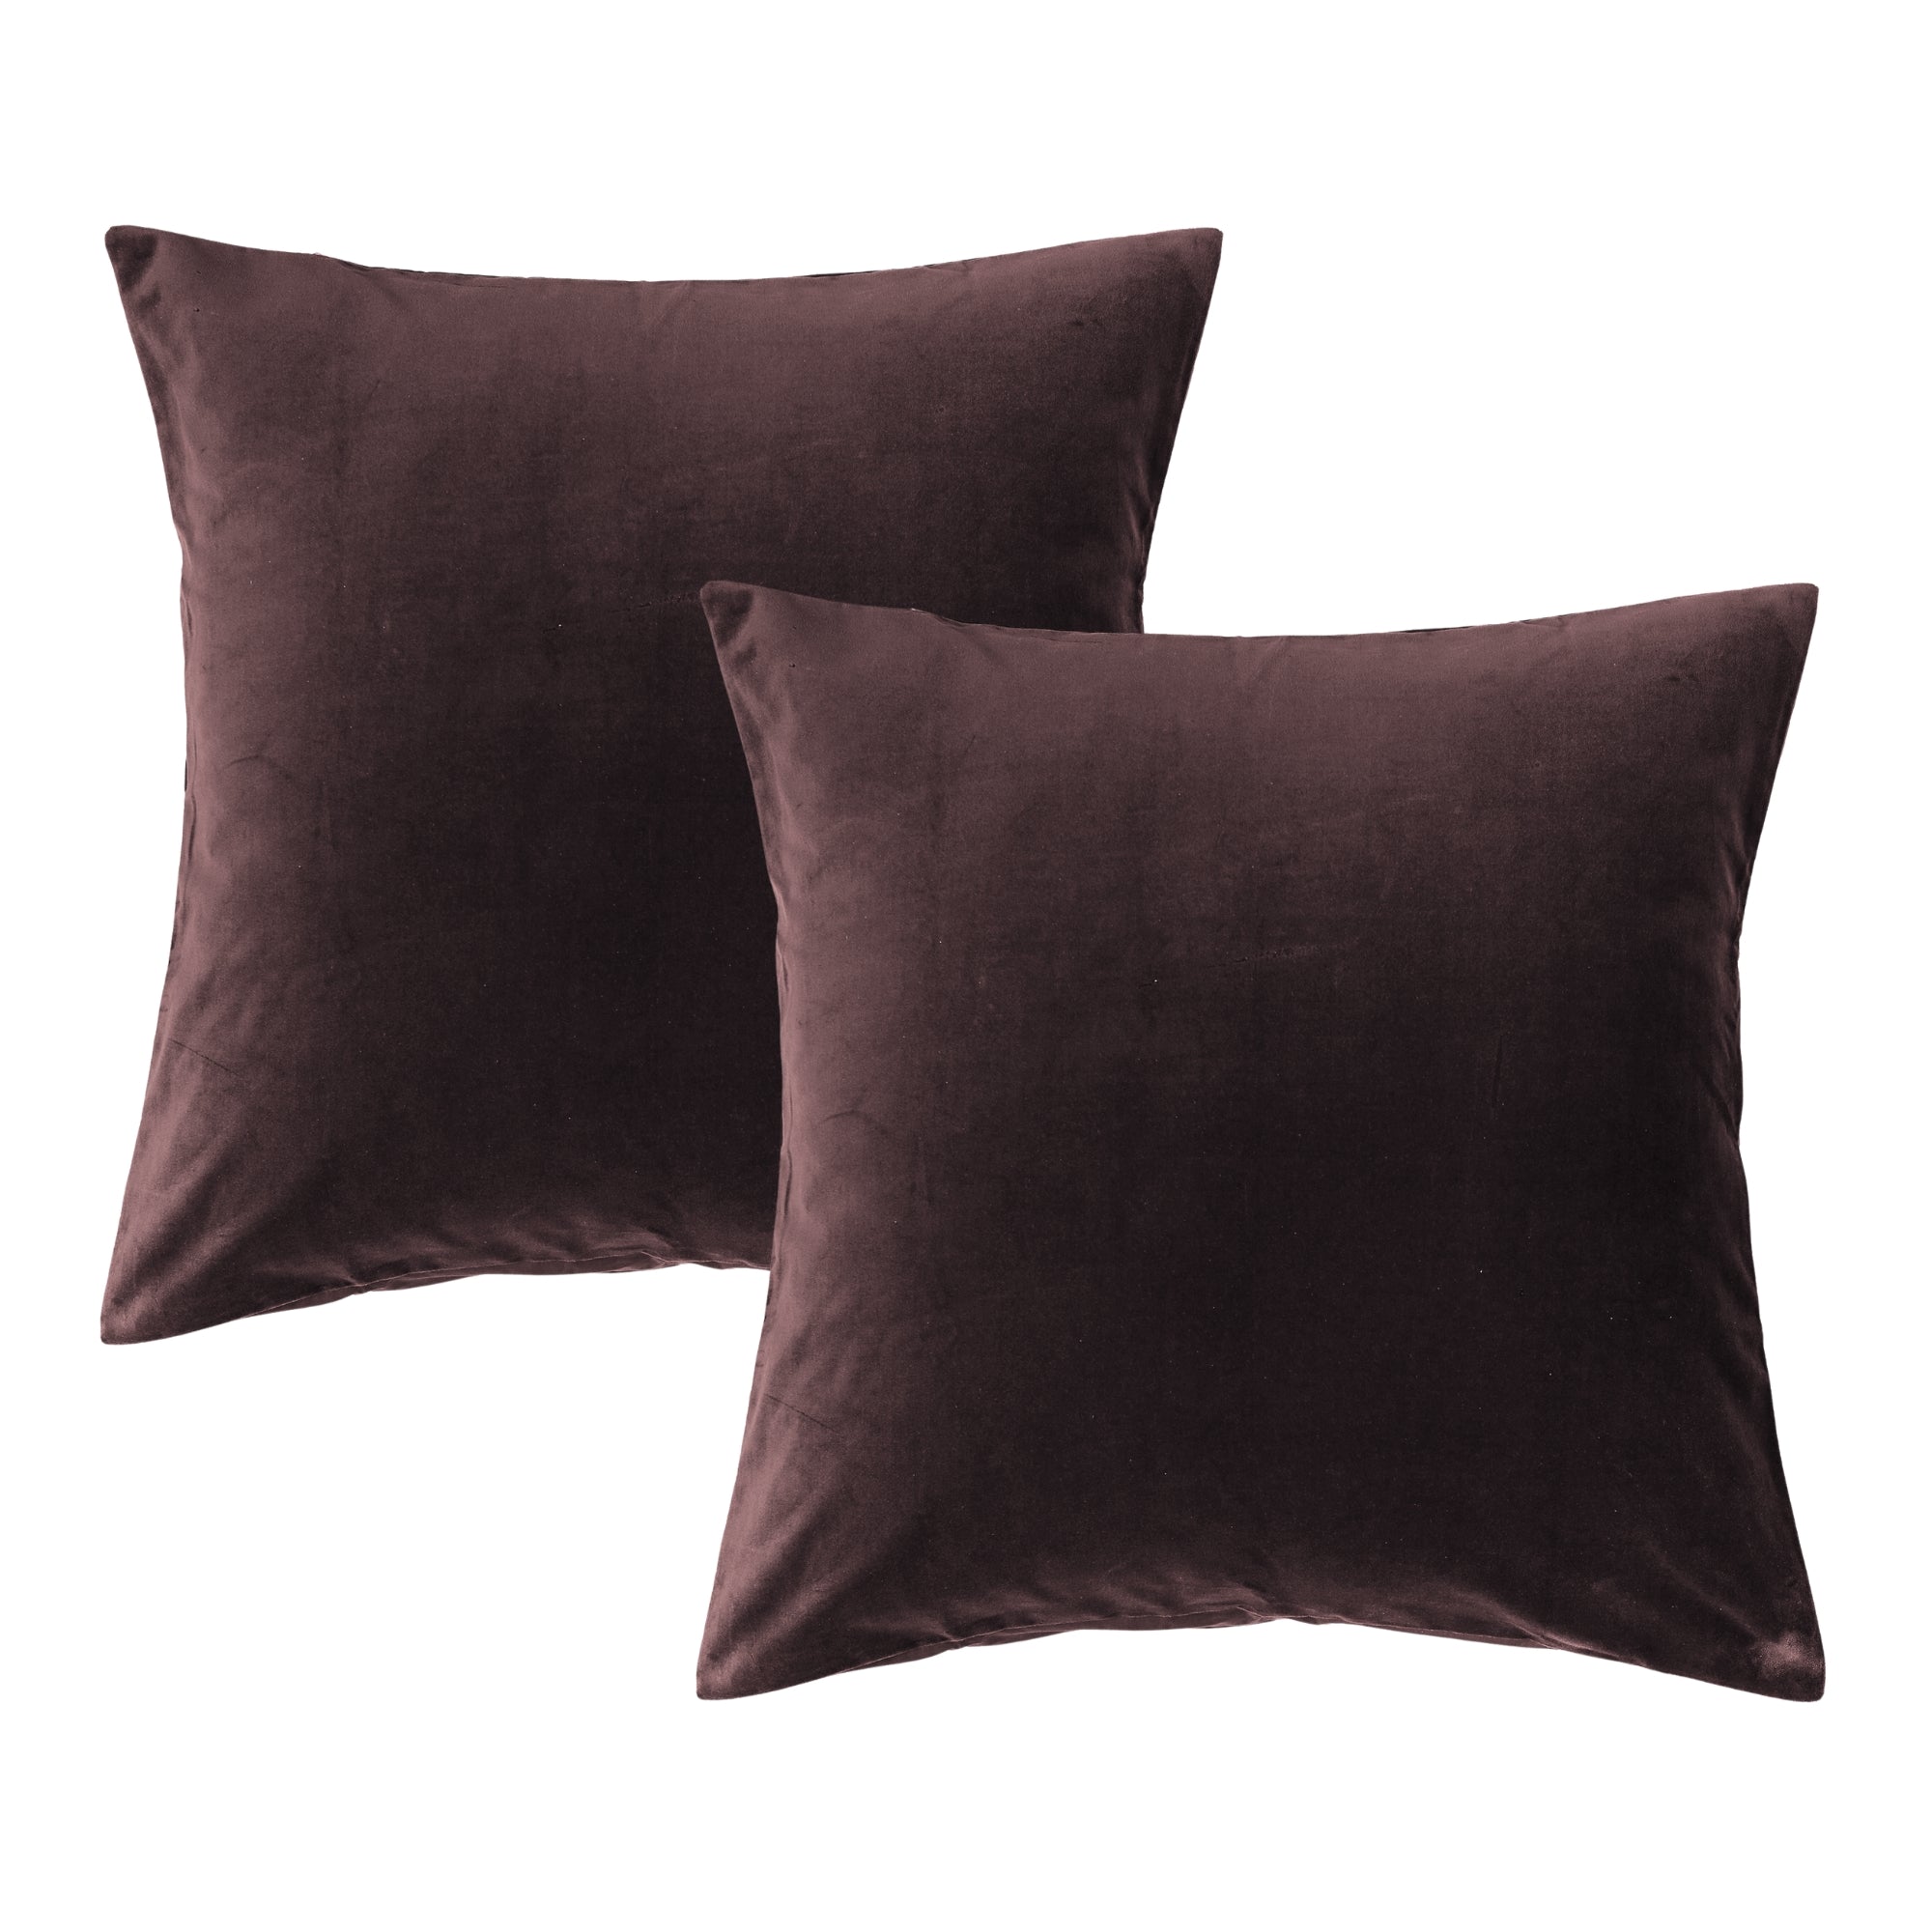 Espresso European Velvet Pillowcases in a Rich Brown Shade - Front View